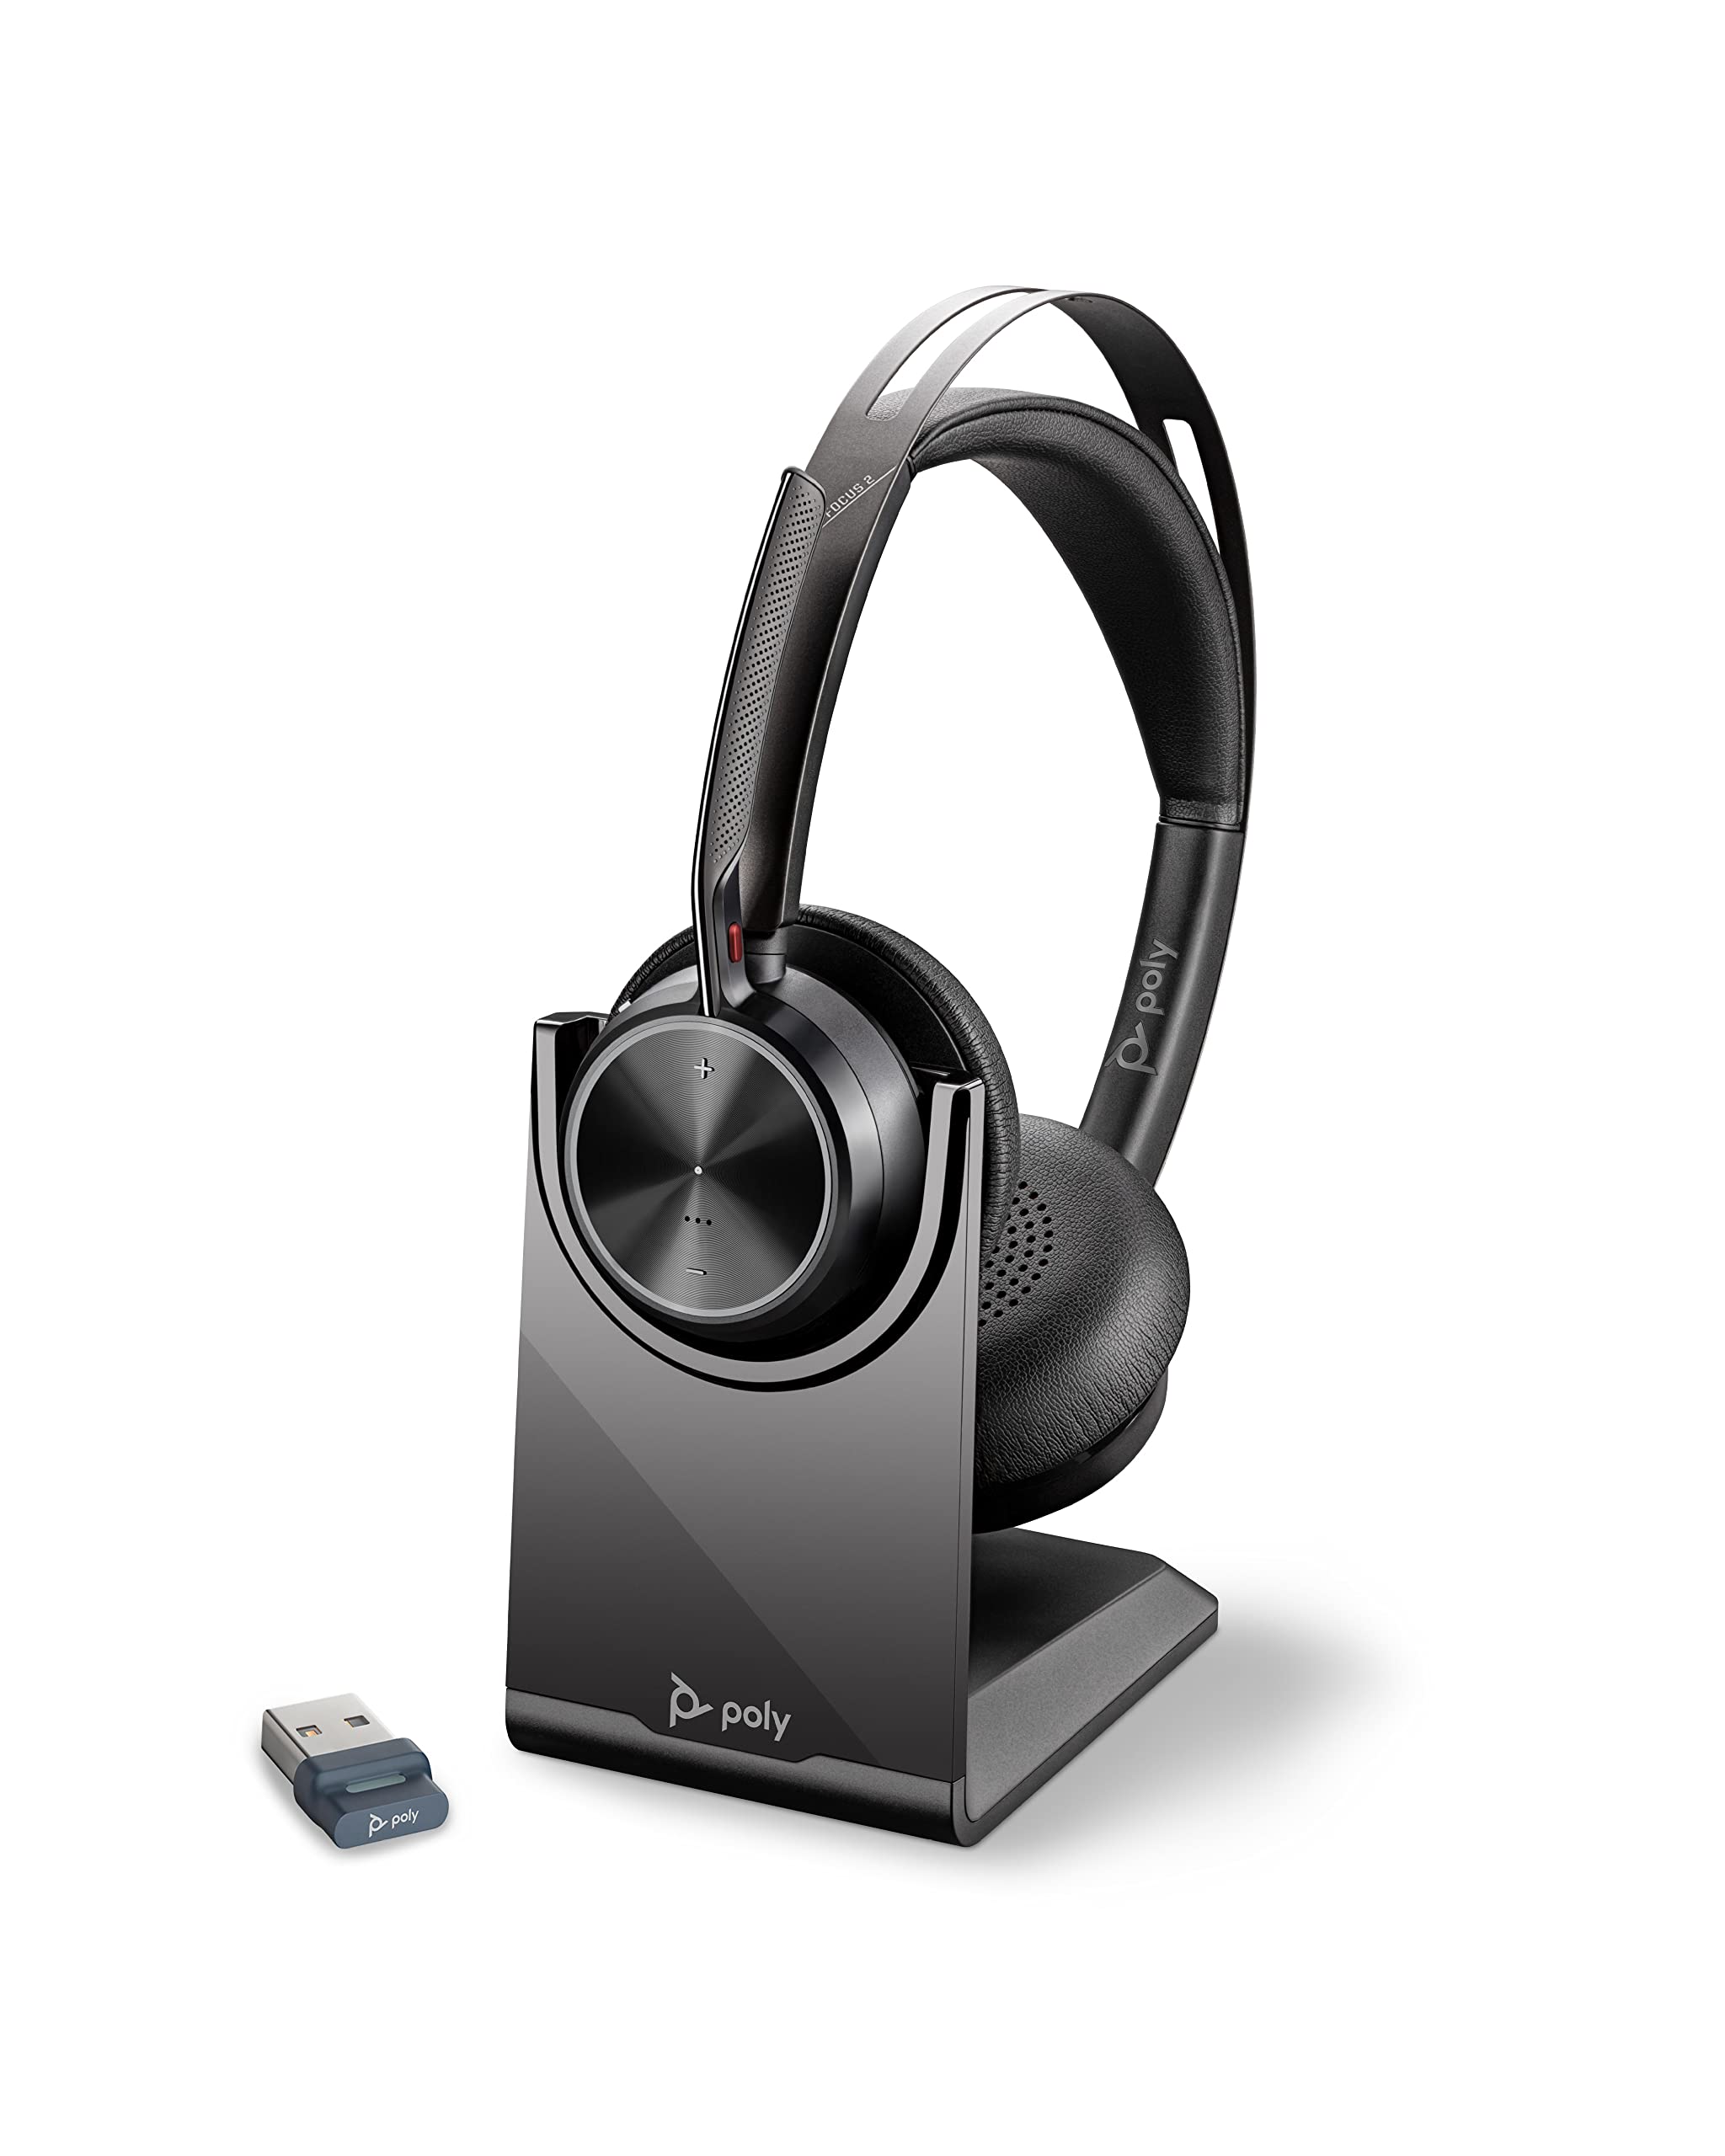 Poly (Plantronics + Polycom) Plantronics by Poly Voyager Focus UC ワイヤレス ヘッドセット (コンピューター用)